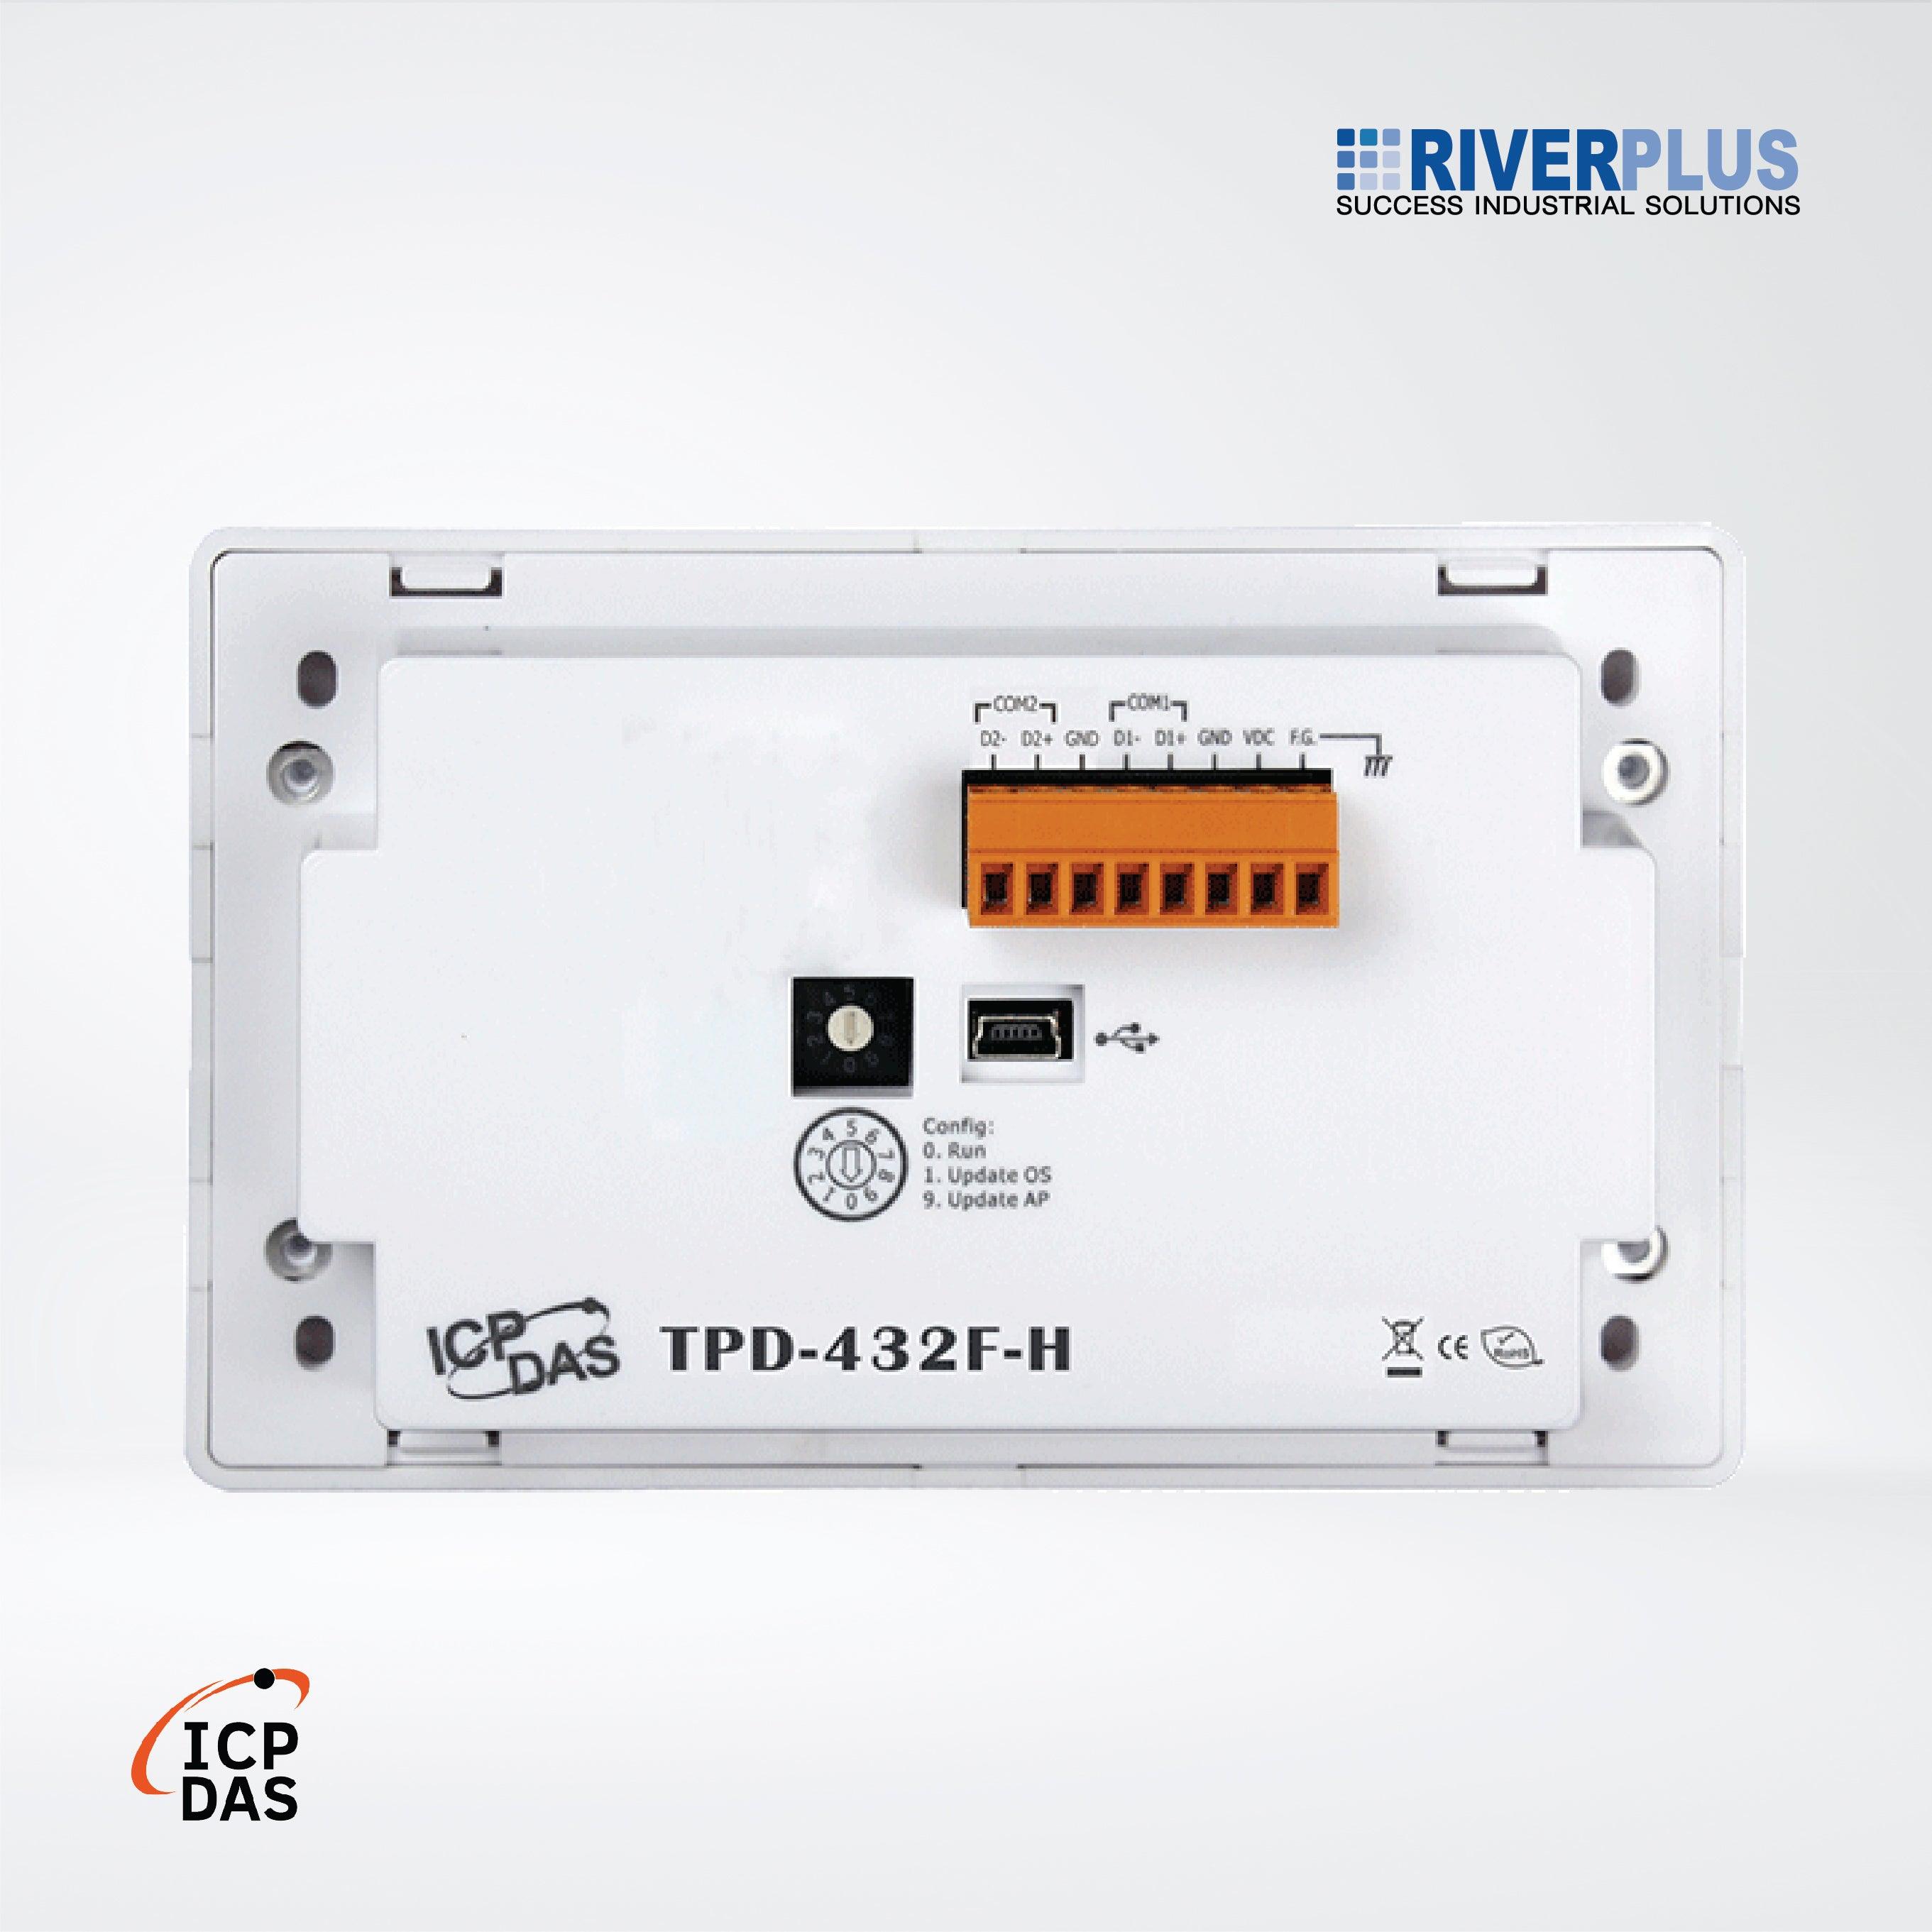 TPD-432F-H 4.3" Touch HMI Device with 2 x RS-485 - Riverplus